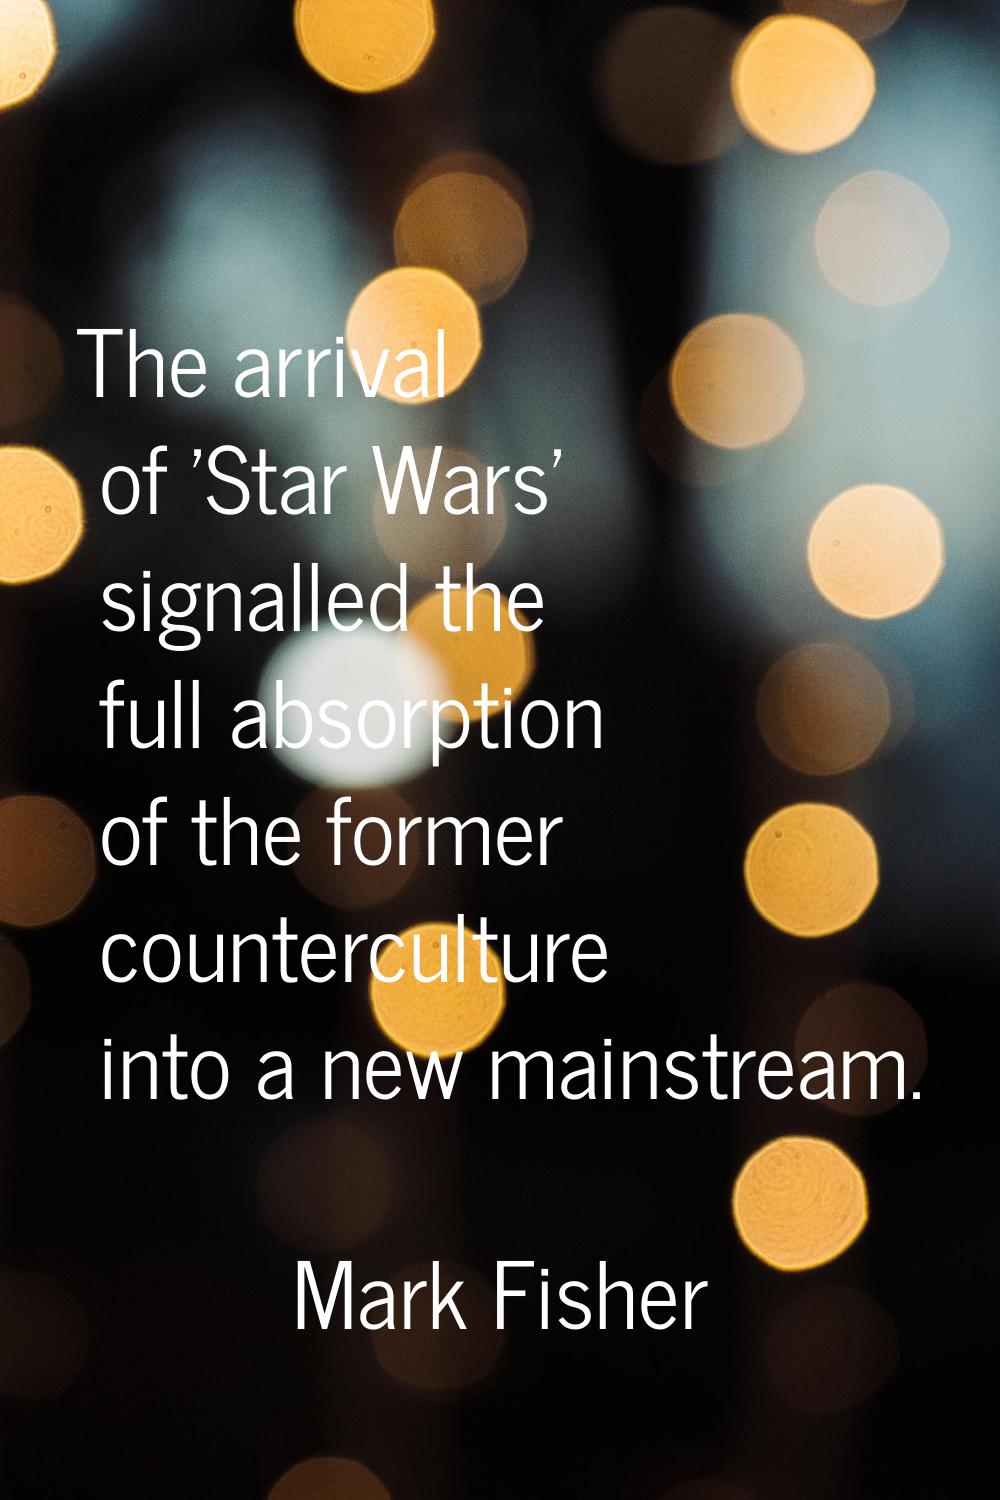 The arrival of 'Star Wars' signalled the full absorption of the former counterculture into a new ma